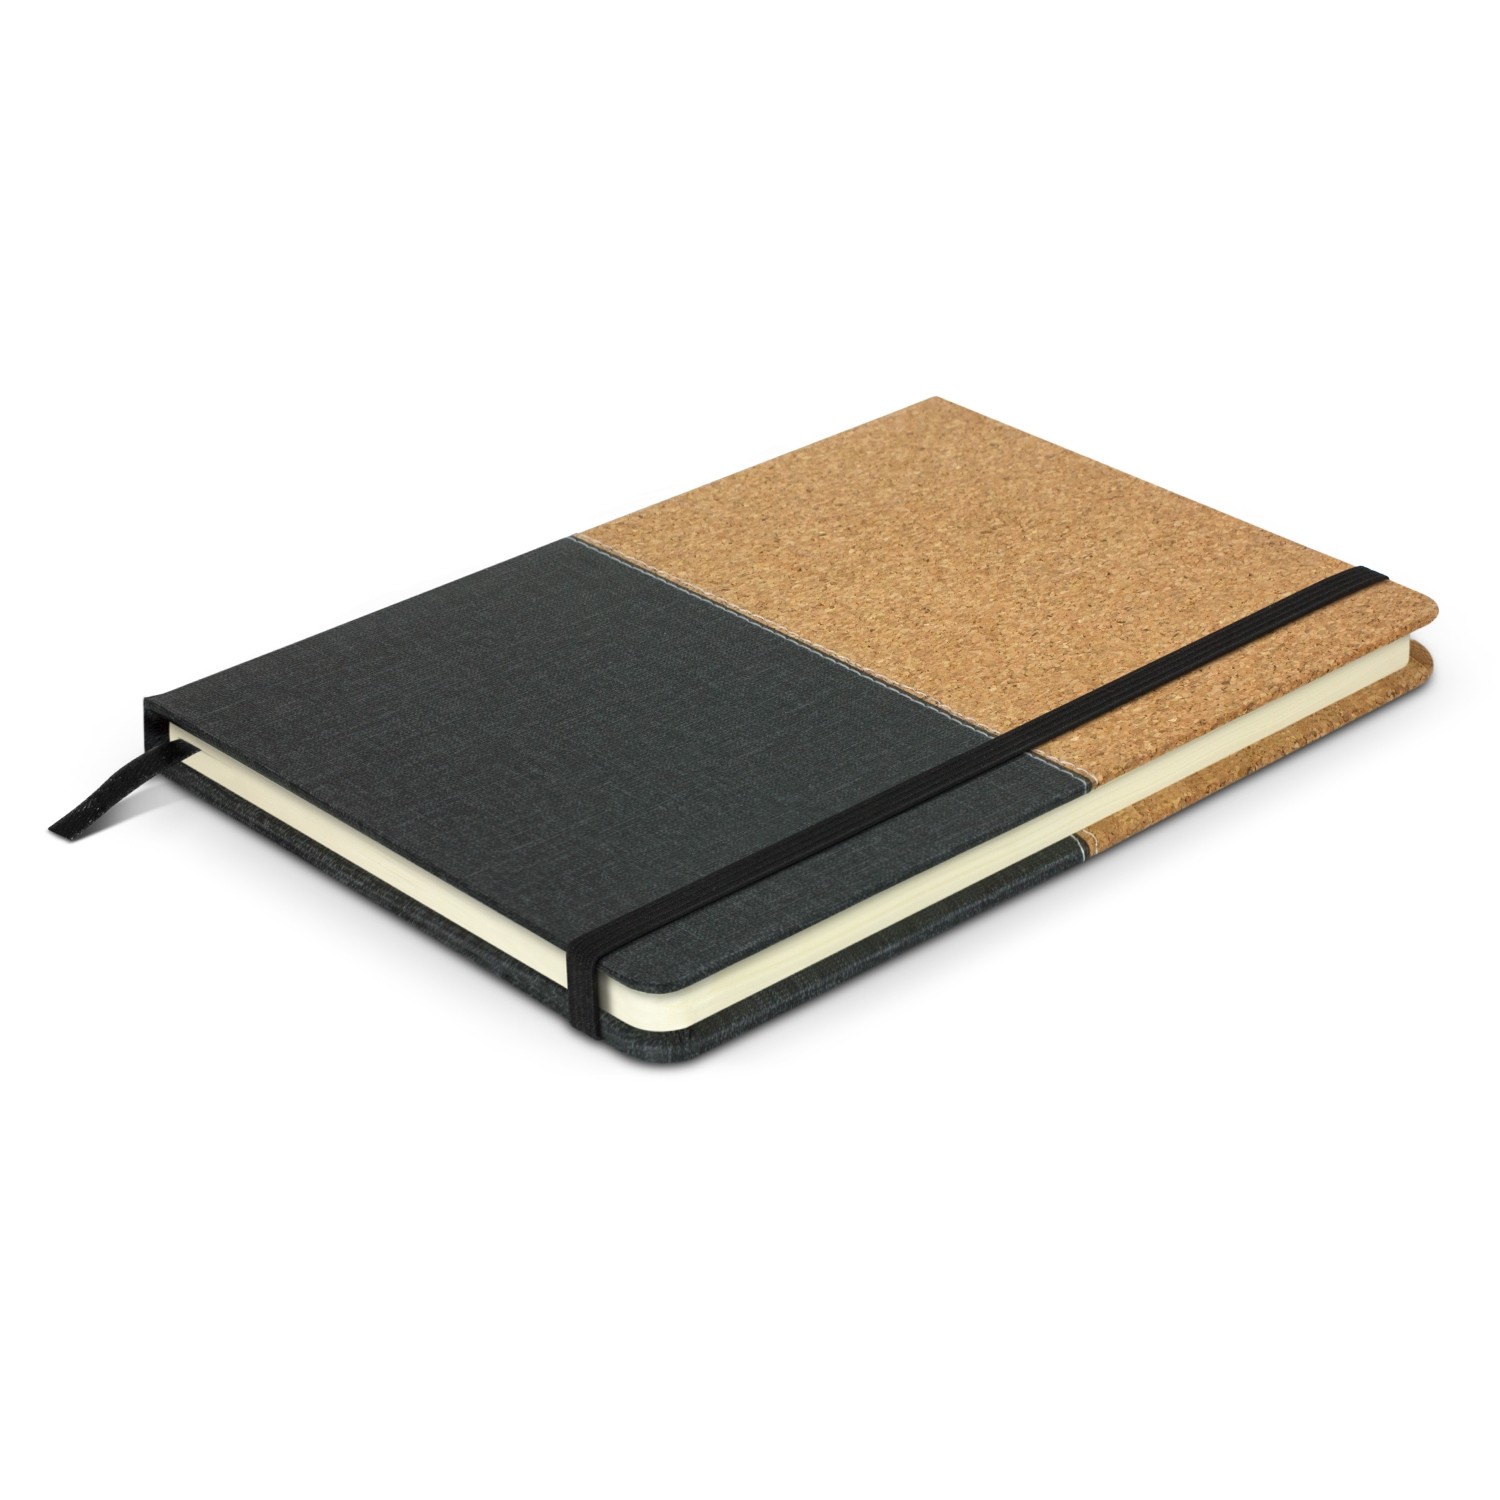 Euless PU Hard Cover Notebooks